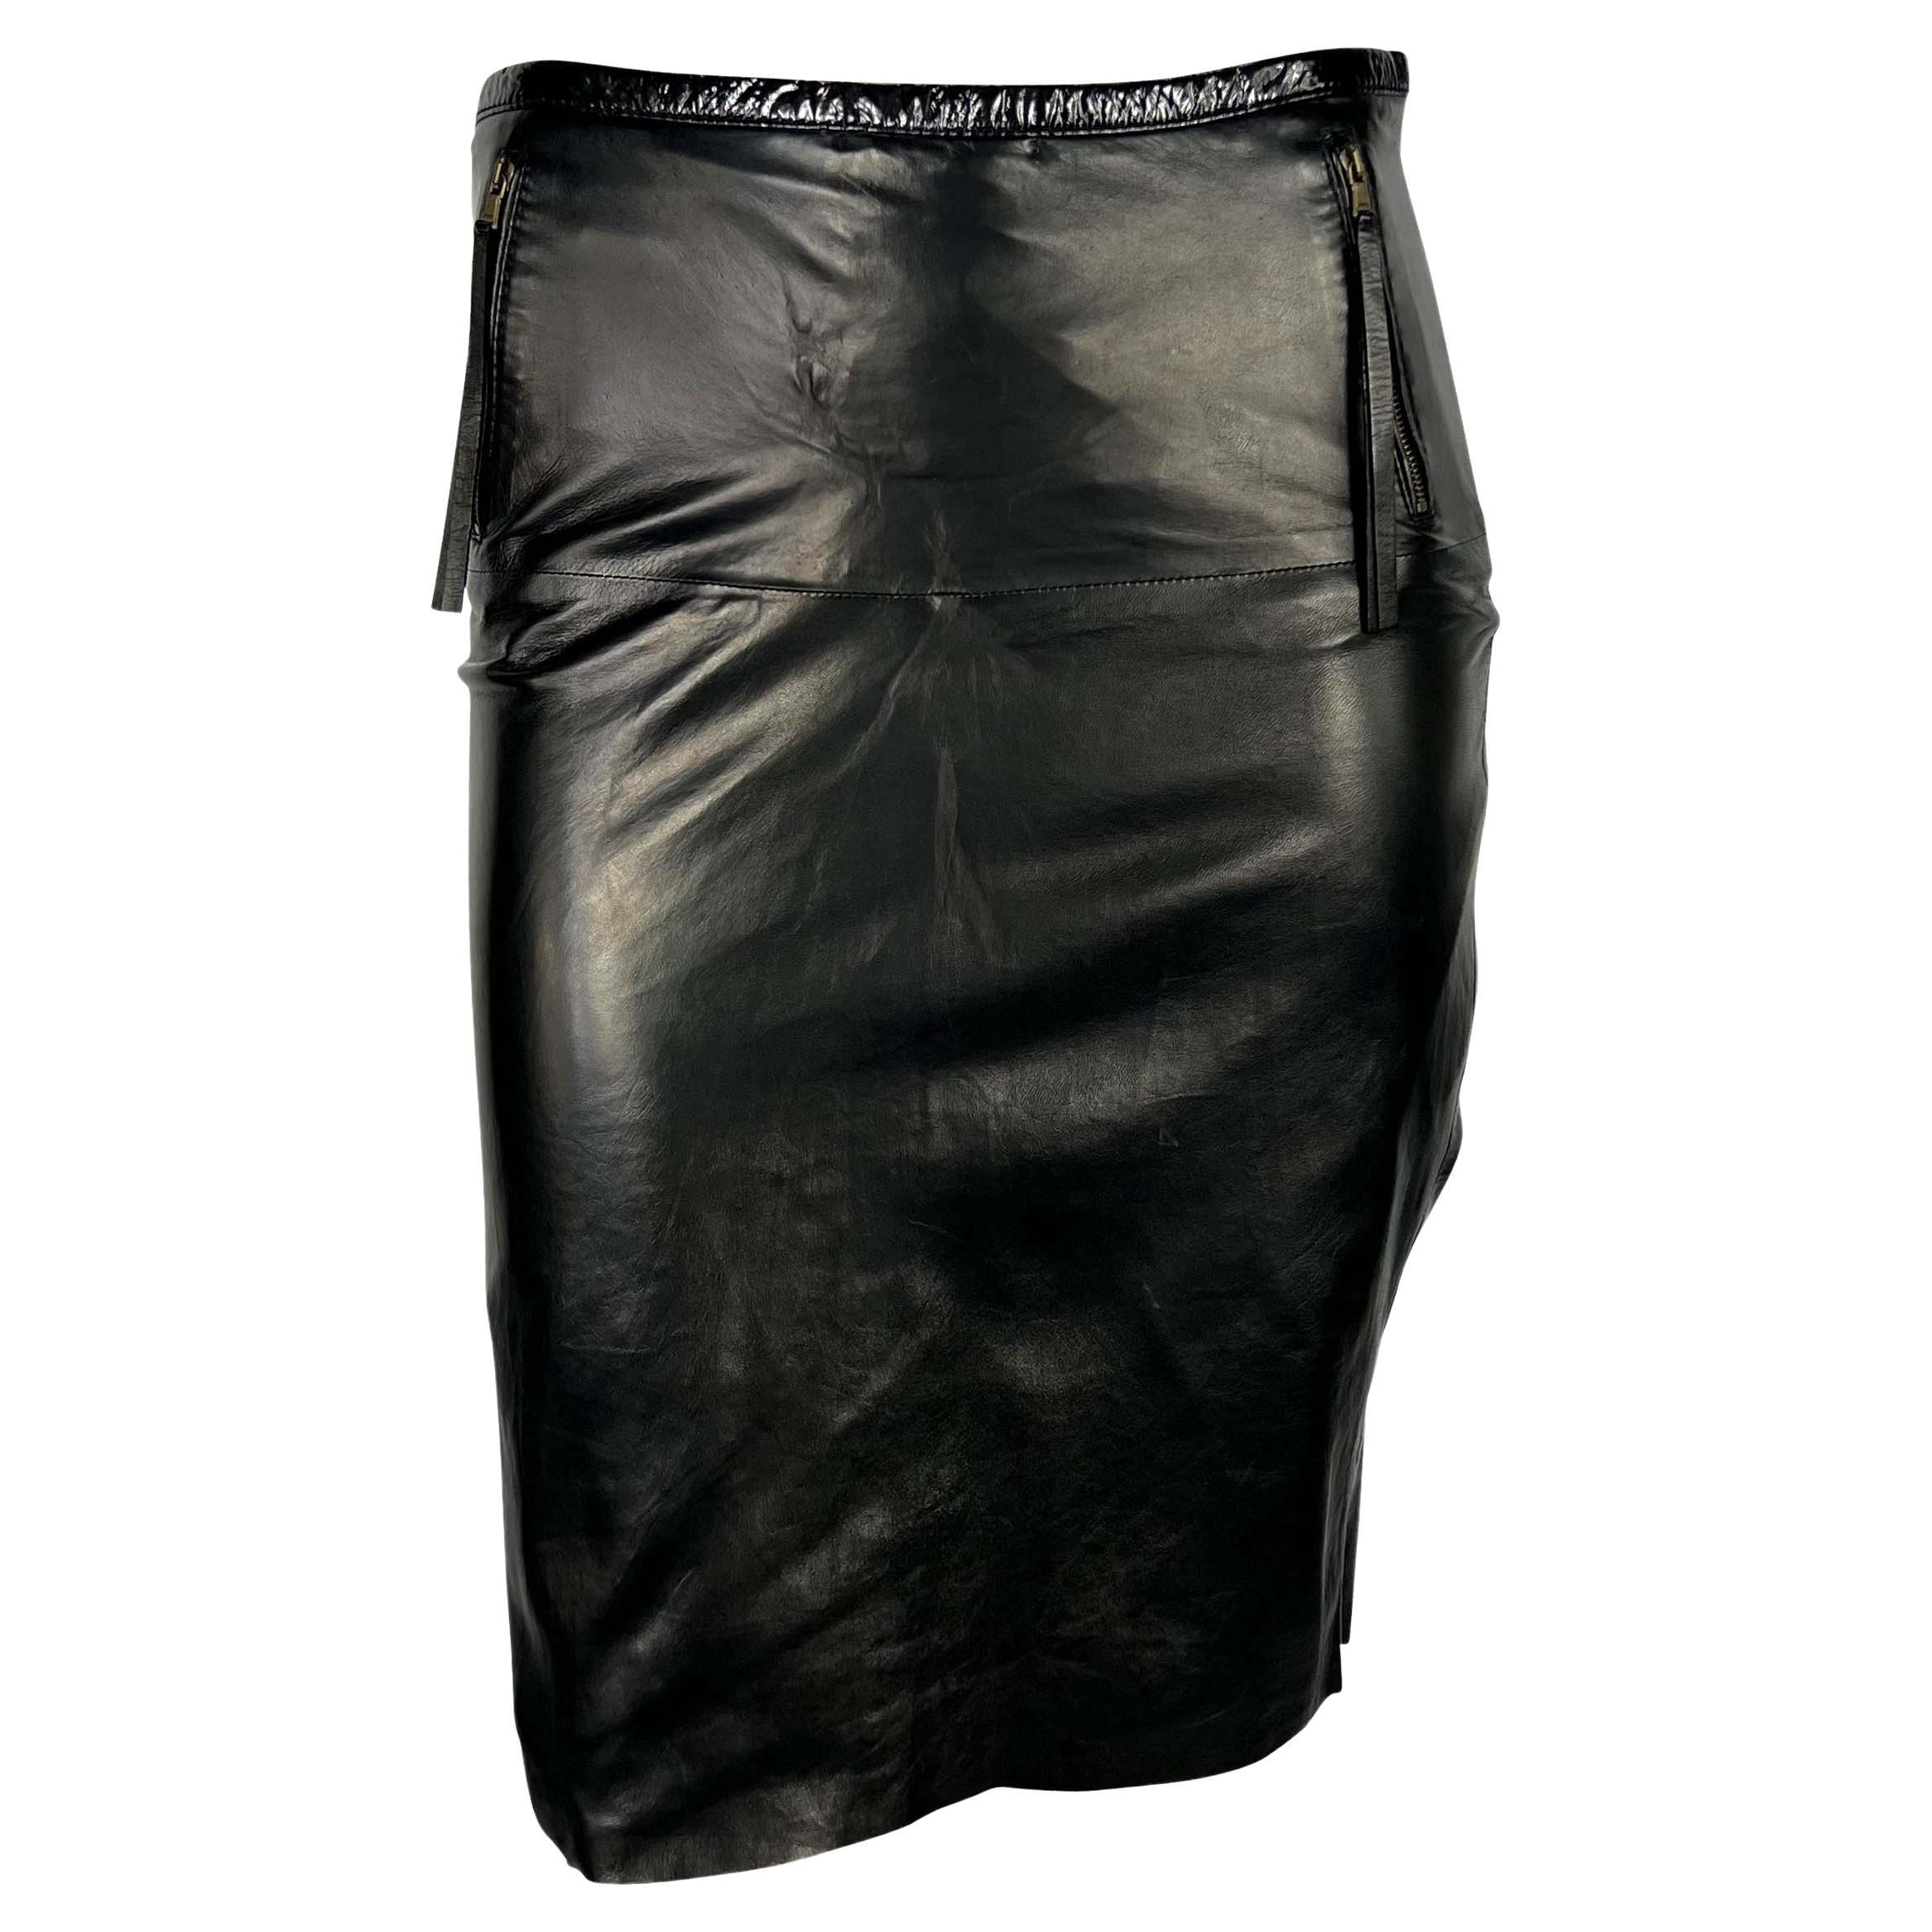 2000s leather skirt